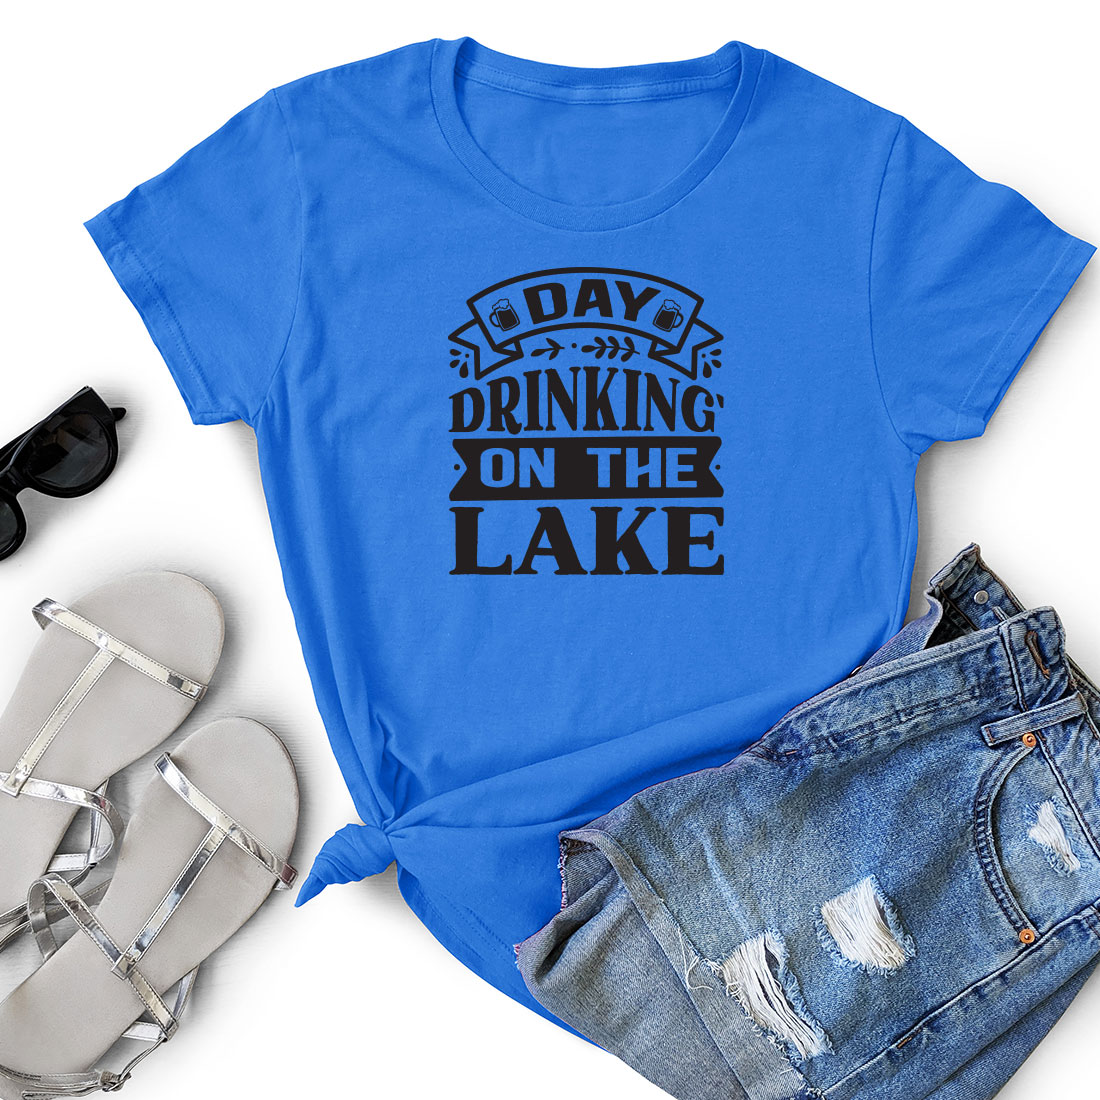 Blue shirt that says drinking on the lake.